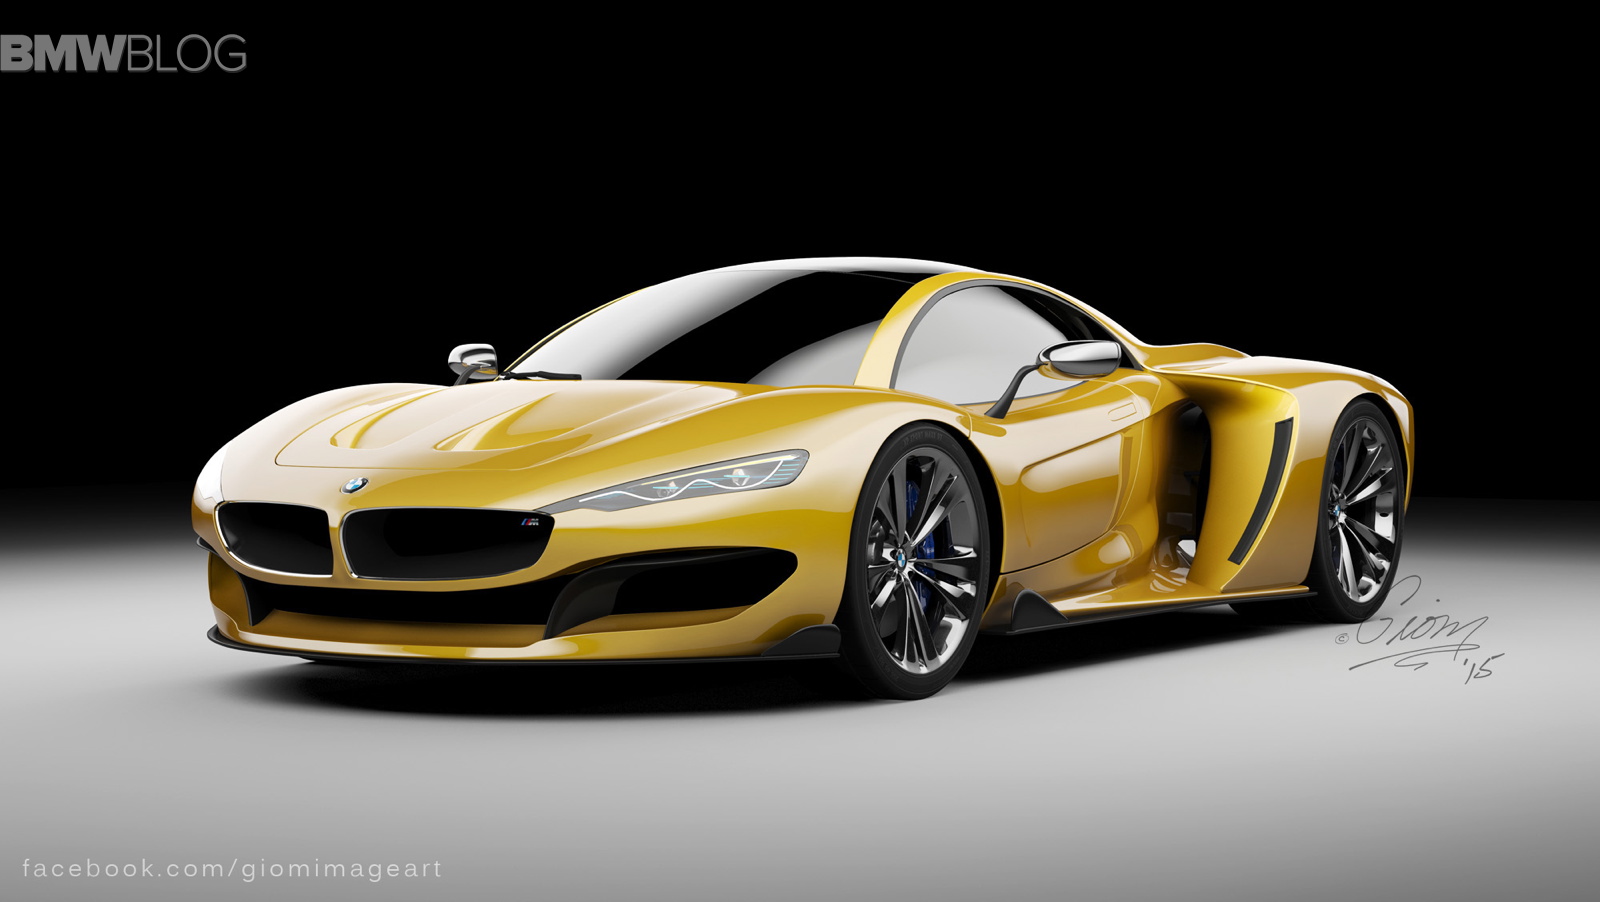 Rendering: BMW Hypercar to compete with McLaren P1 and LaFerrari